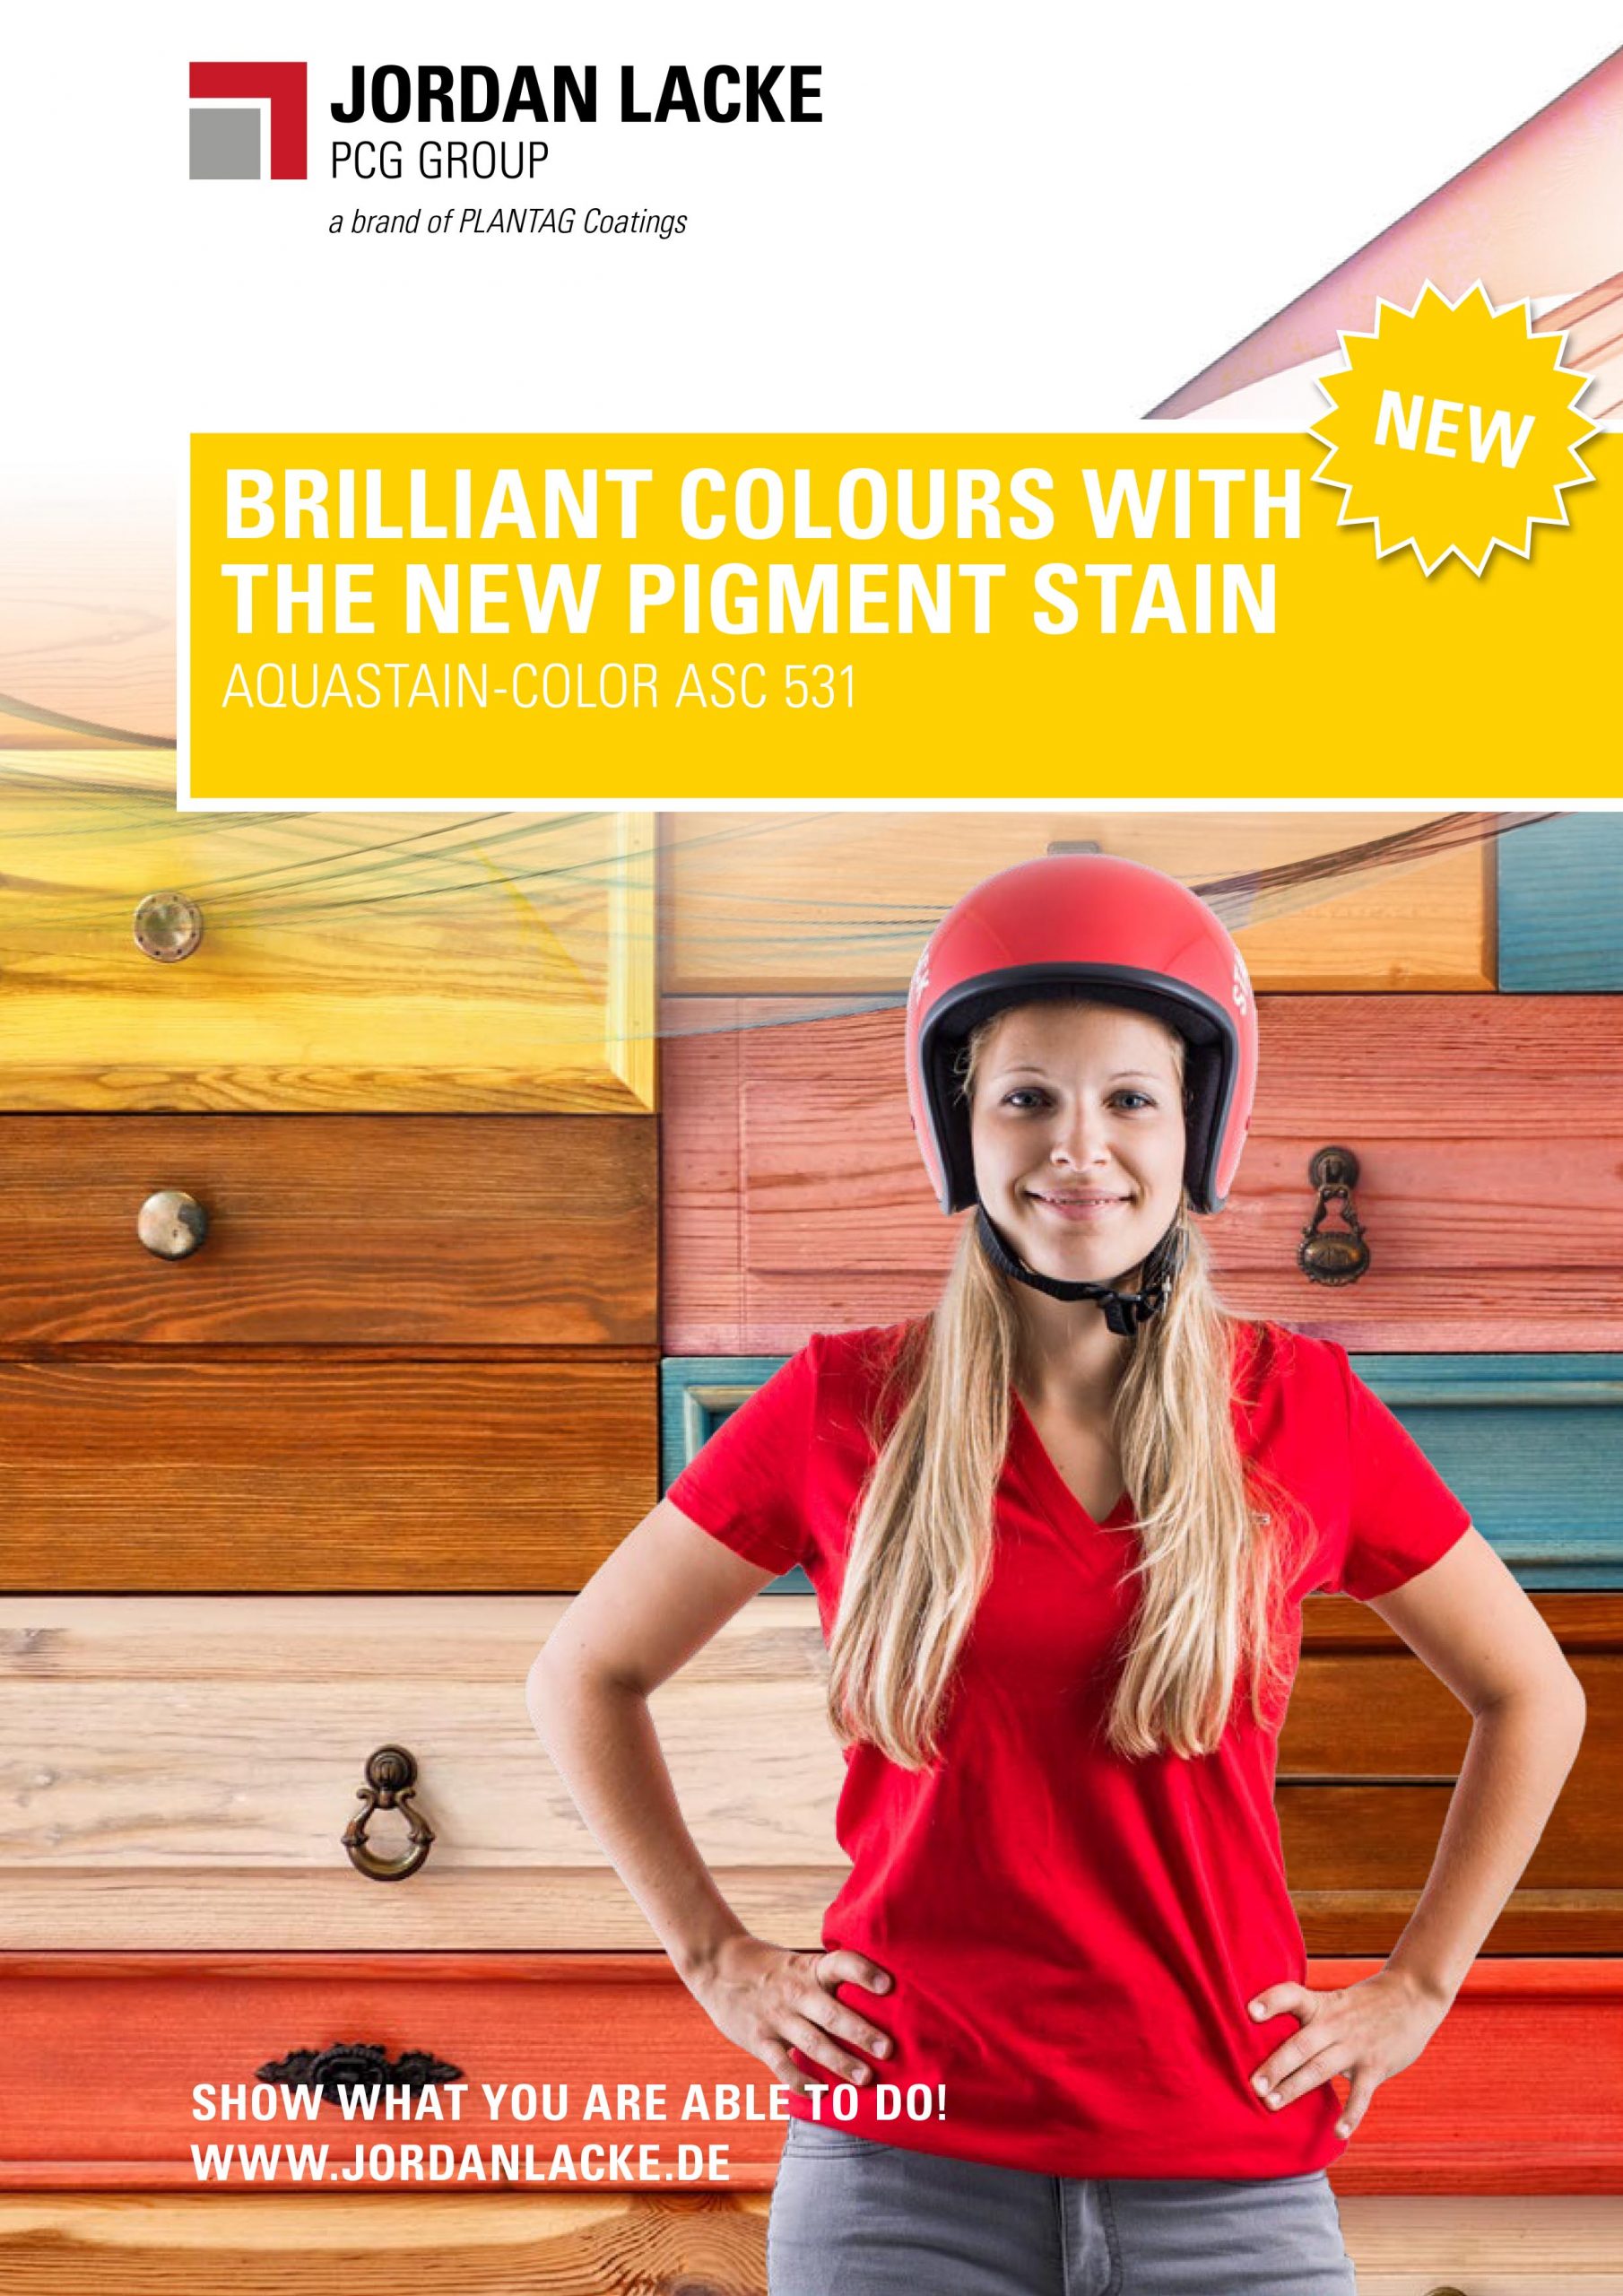 New water-based pigment stain